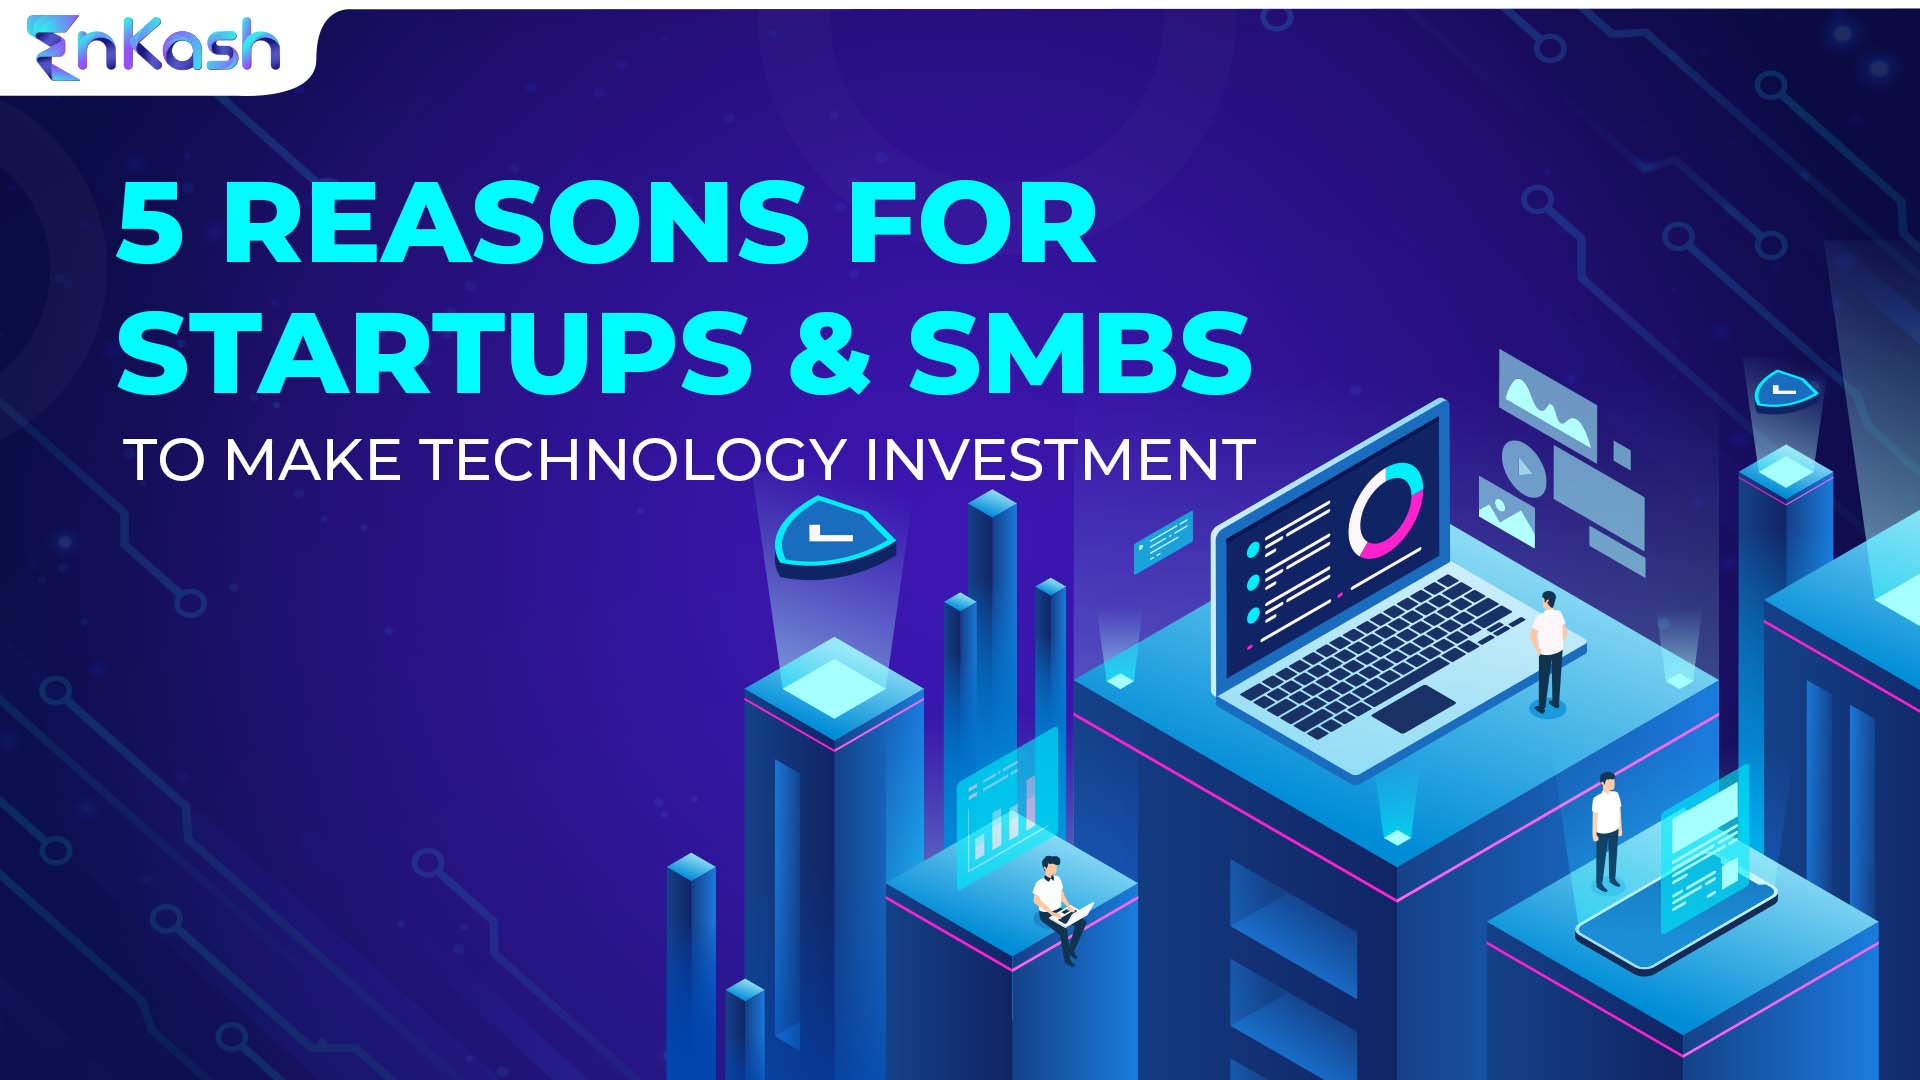 Why Startups & SMBs to Make Technology Investment